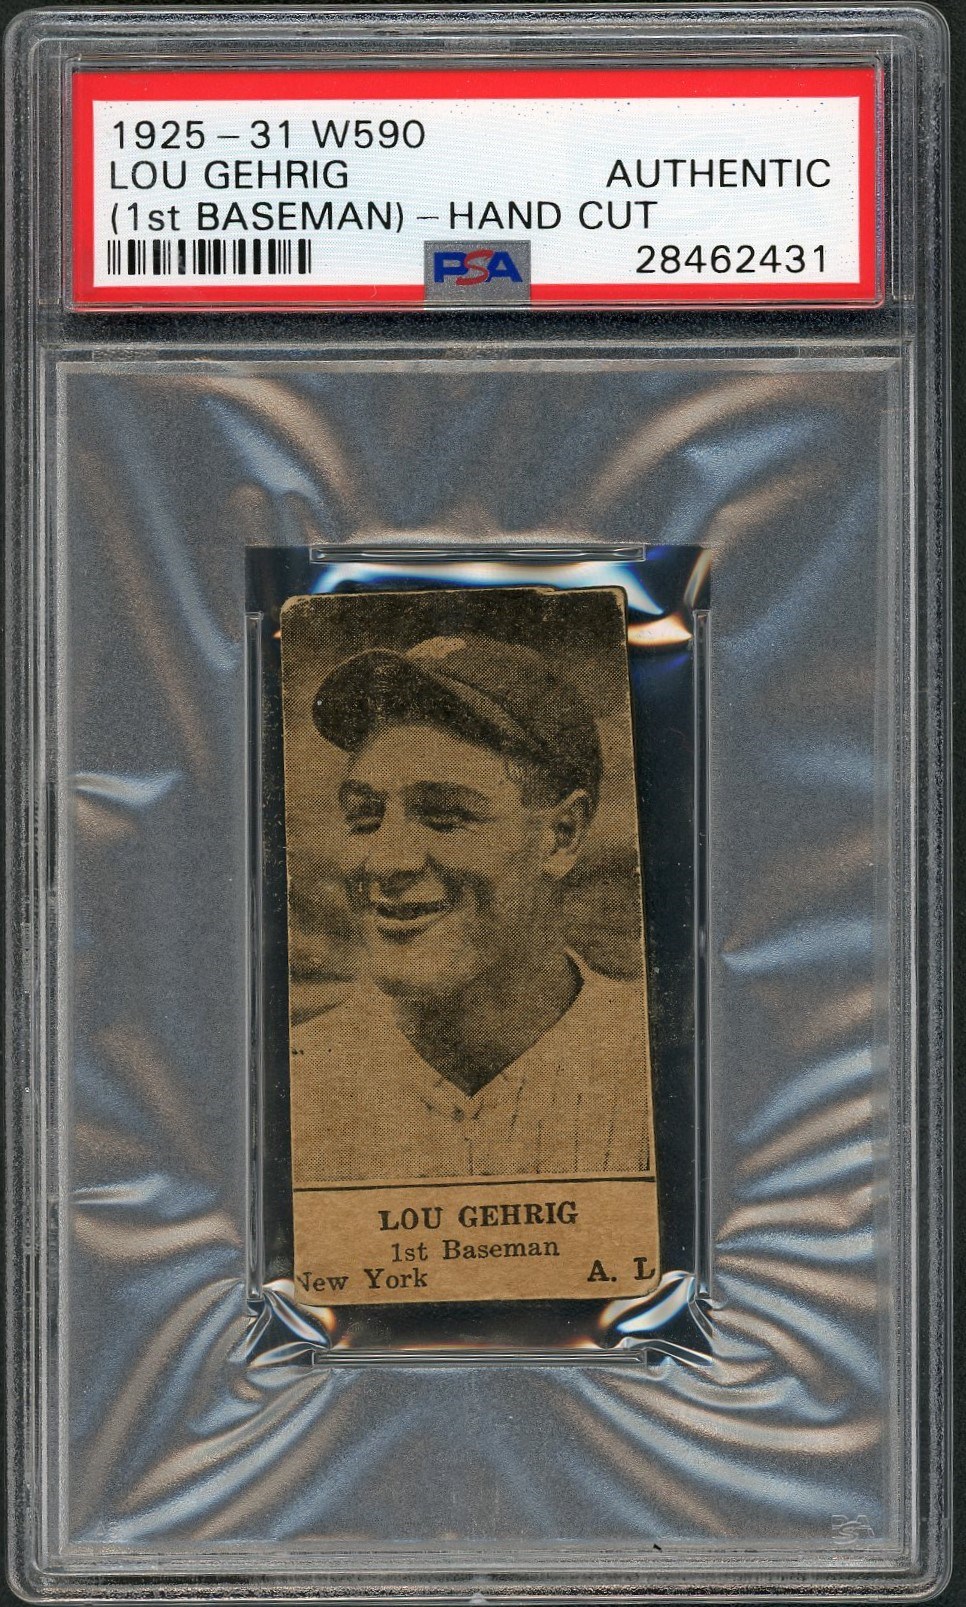 Baseball and Trading Cards - 1925-31 W590 Lou Gehrig (Hand Cut) - PSA AUTHENTIC